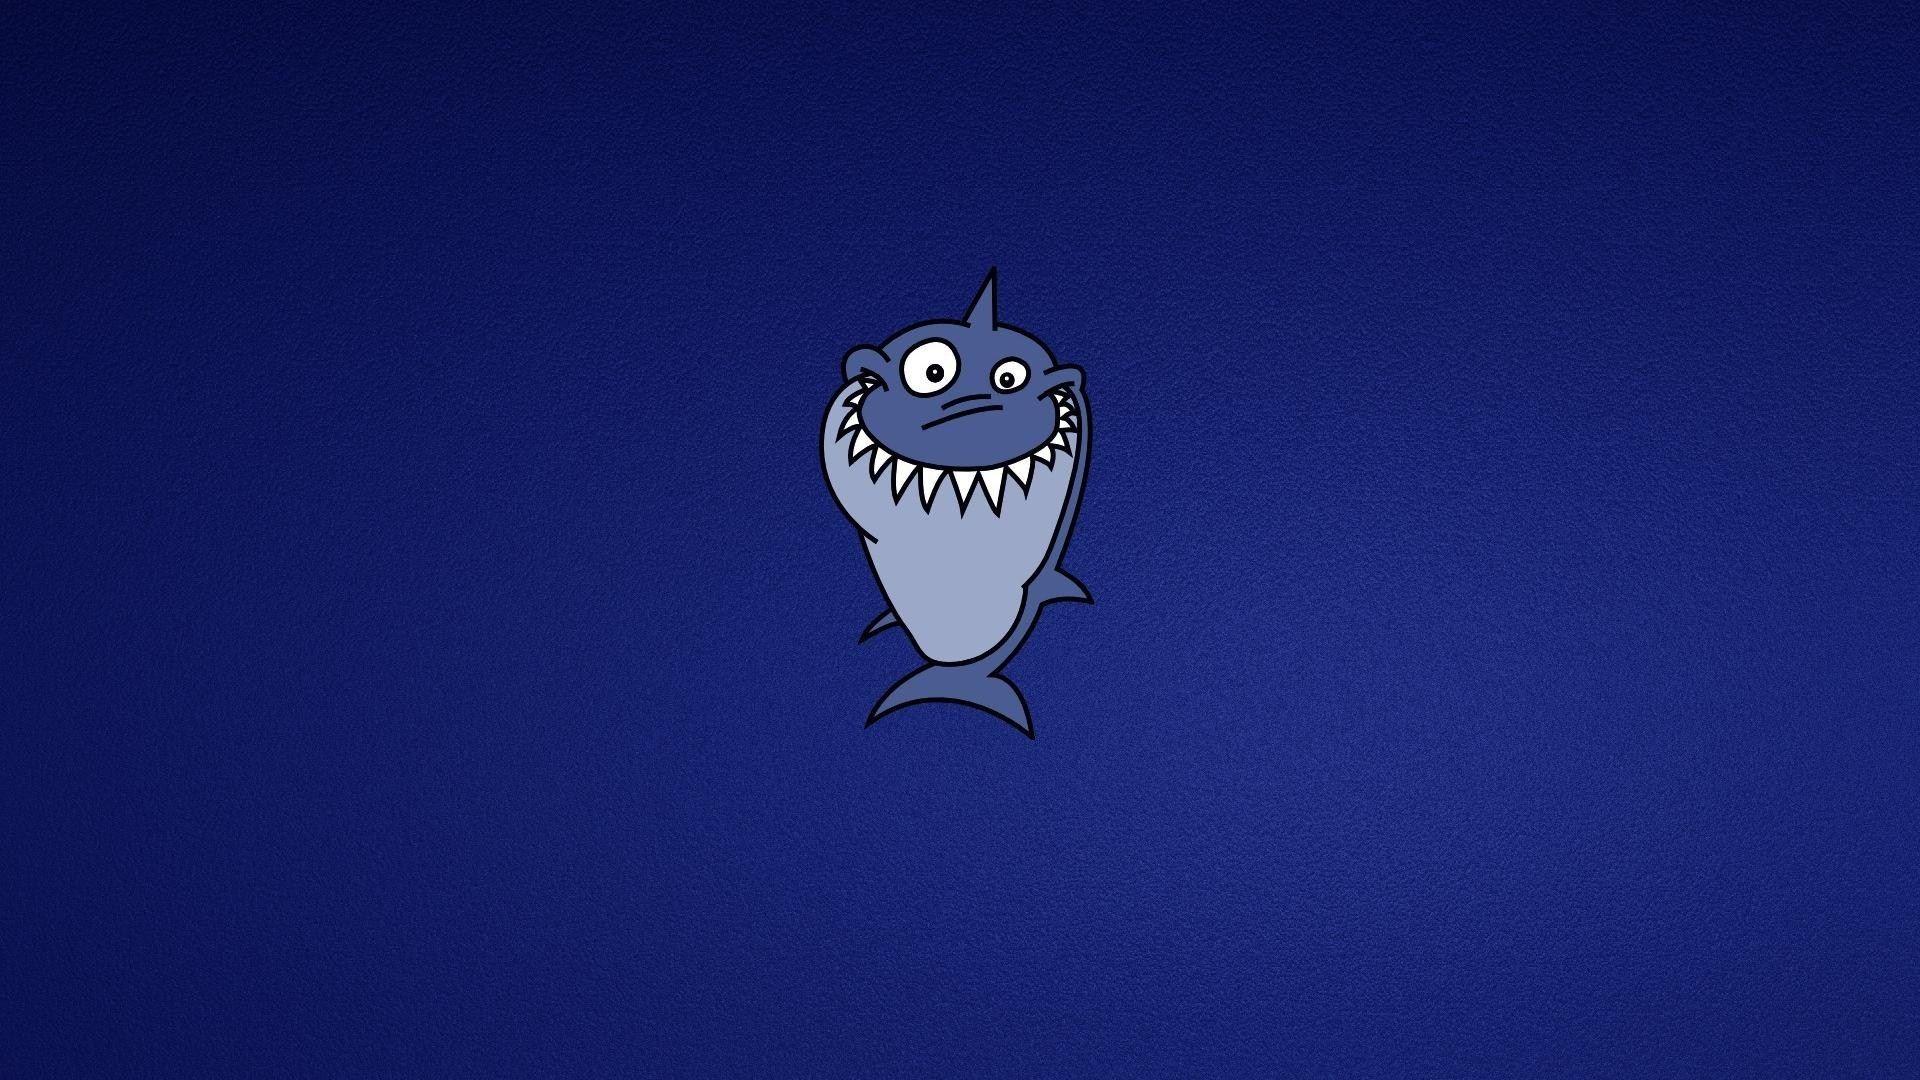 Whale Shark by Qubox on Dribbble